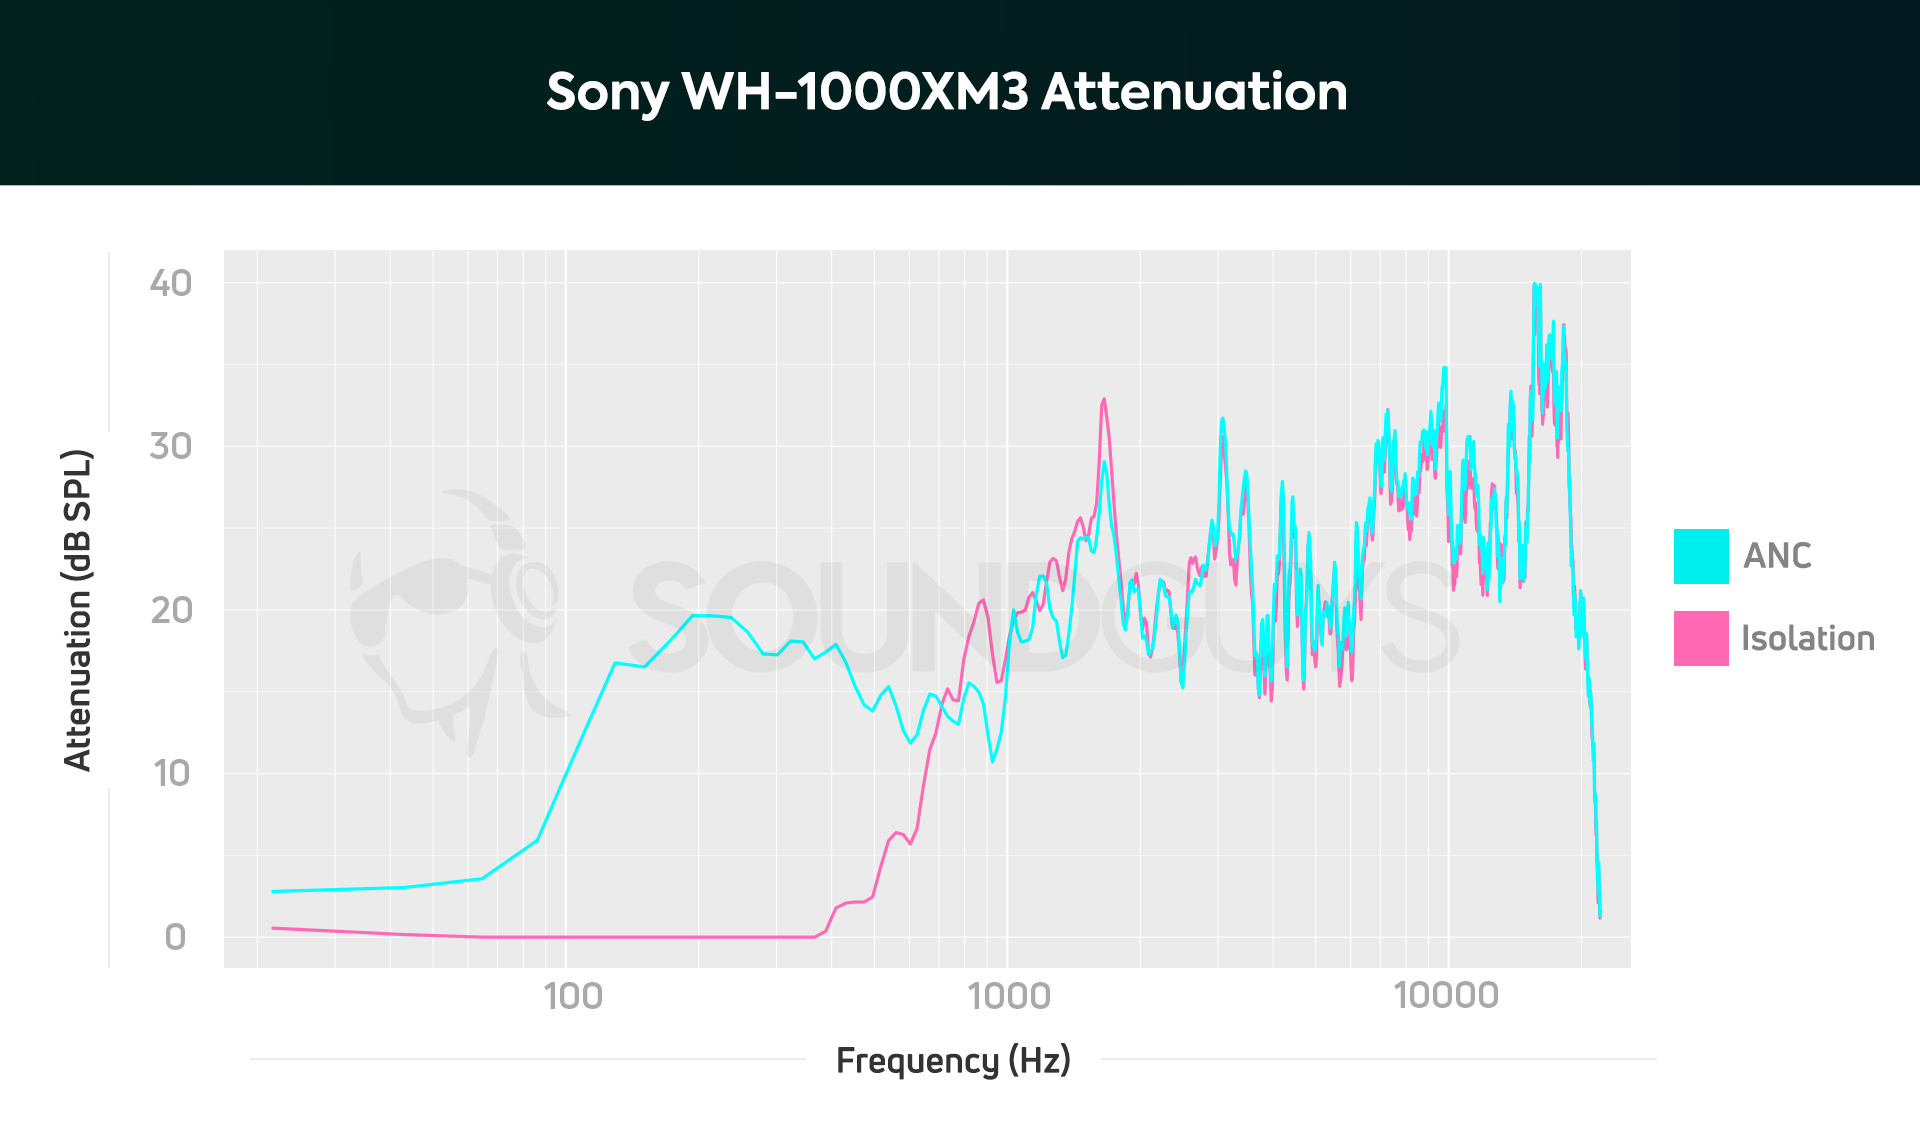 A chart of the Sony WH-1000XM3 noise canceling and passive isolation performance.